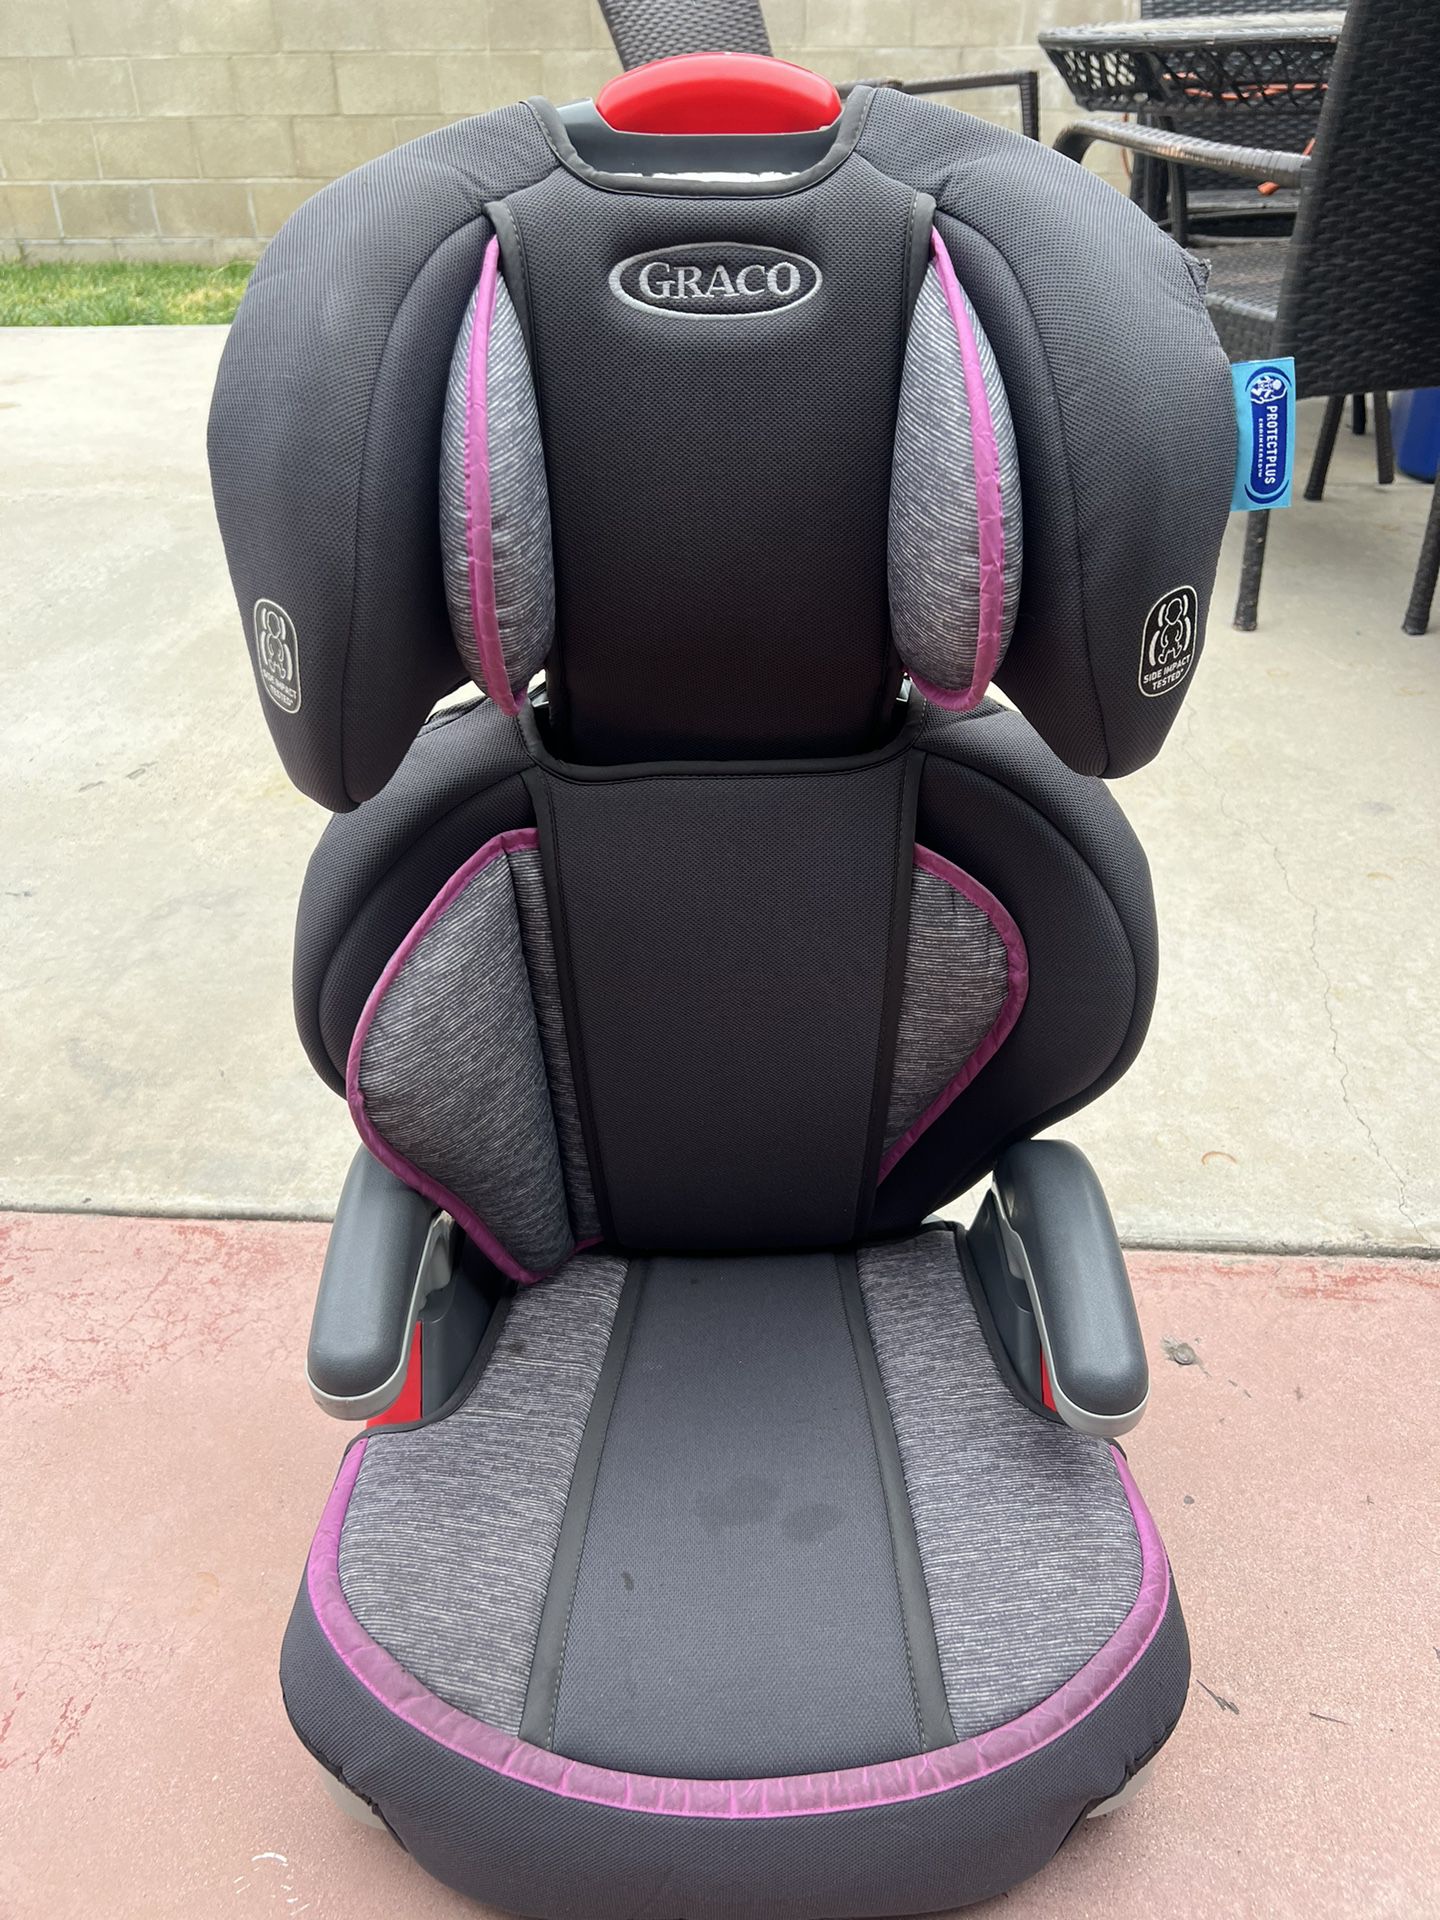 Graco Booster Seat Grey And Purple